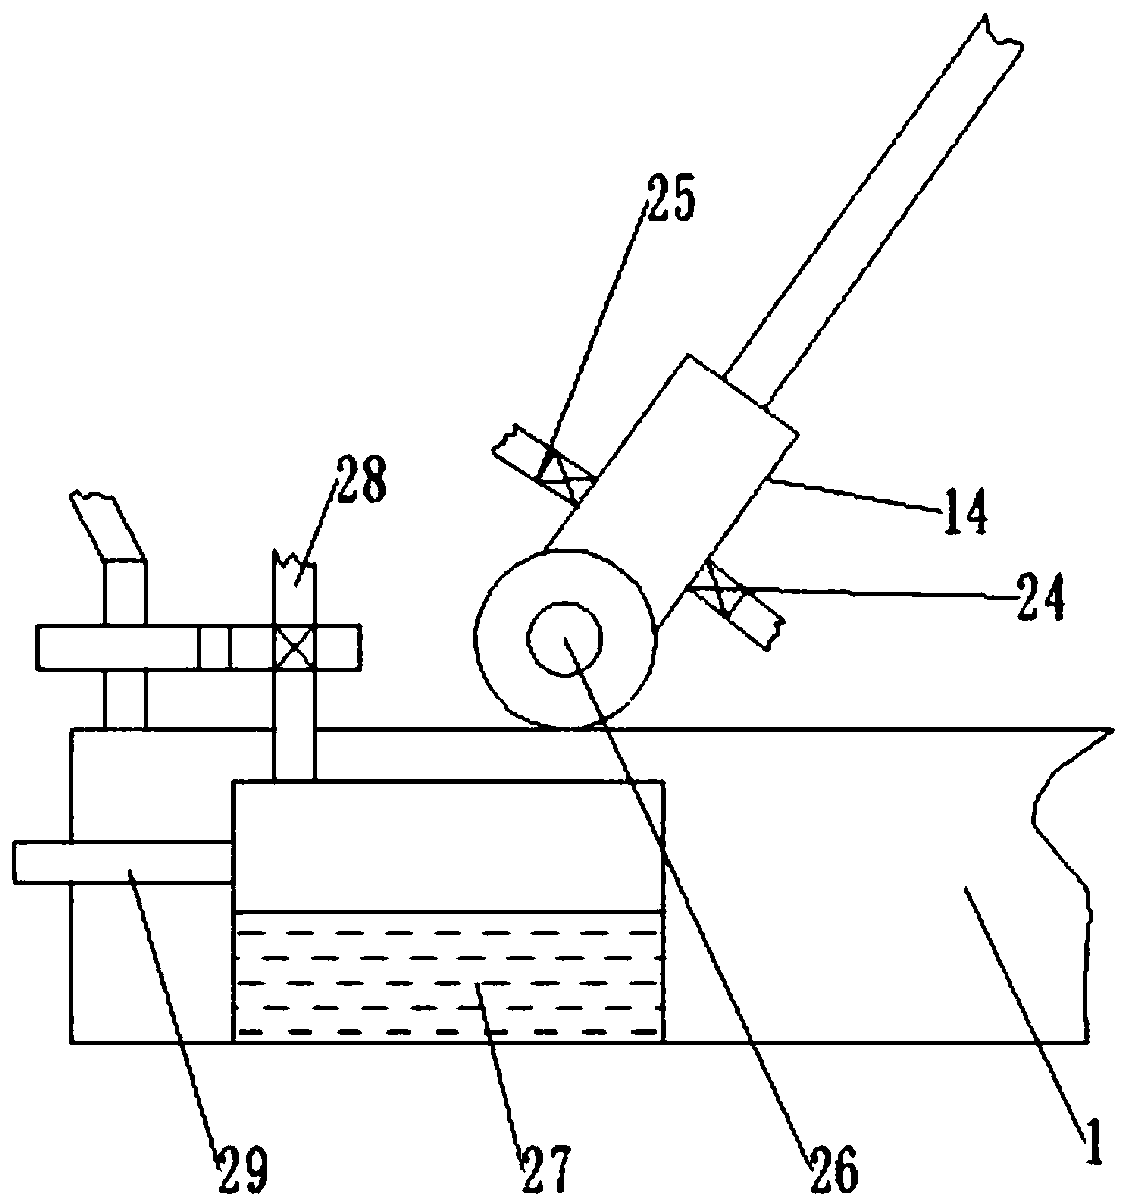 Height adjustable conveying device for electronic product manufacturing workshop